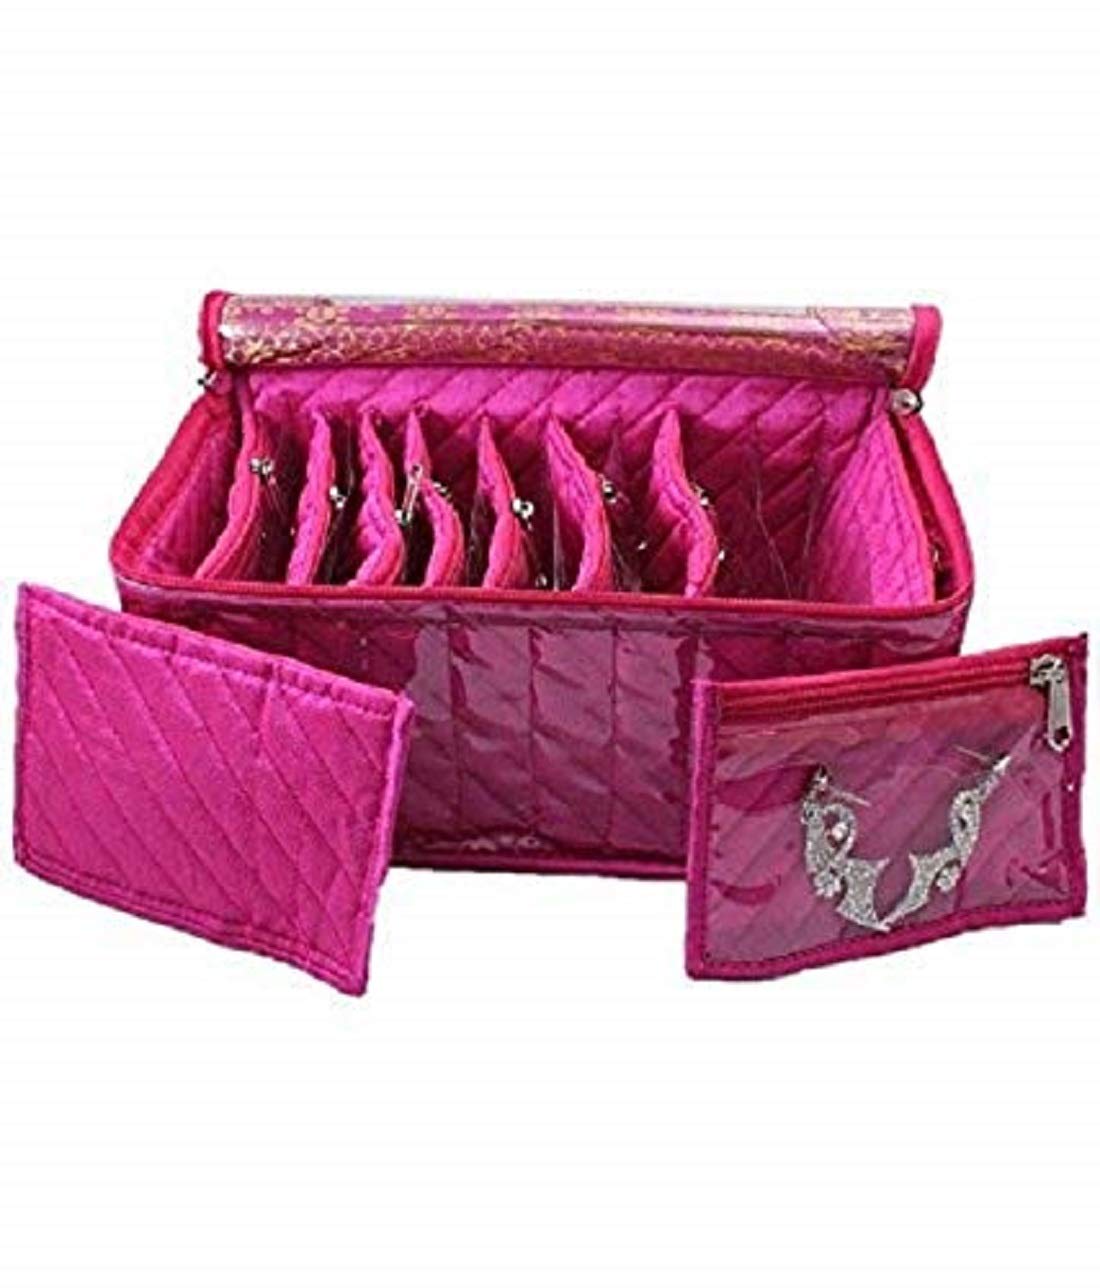 Kuber Industries Cotton Jewellery Kit with Pouches, Pink